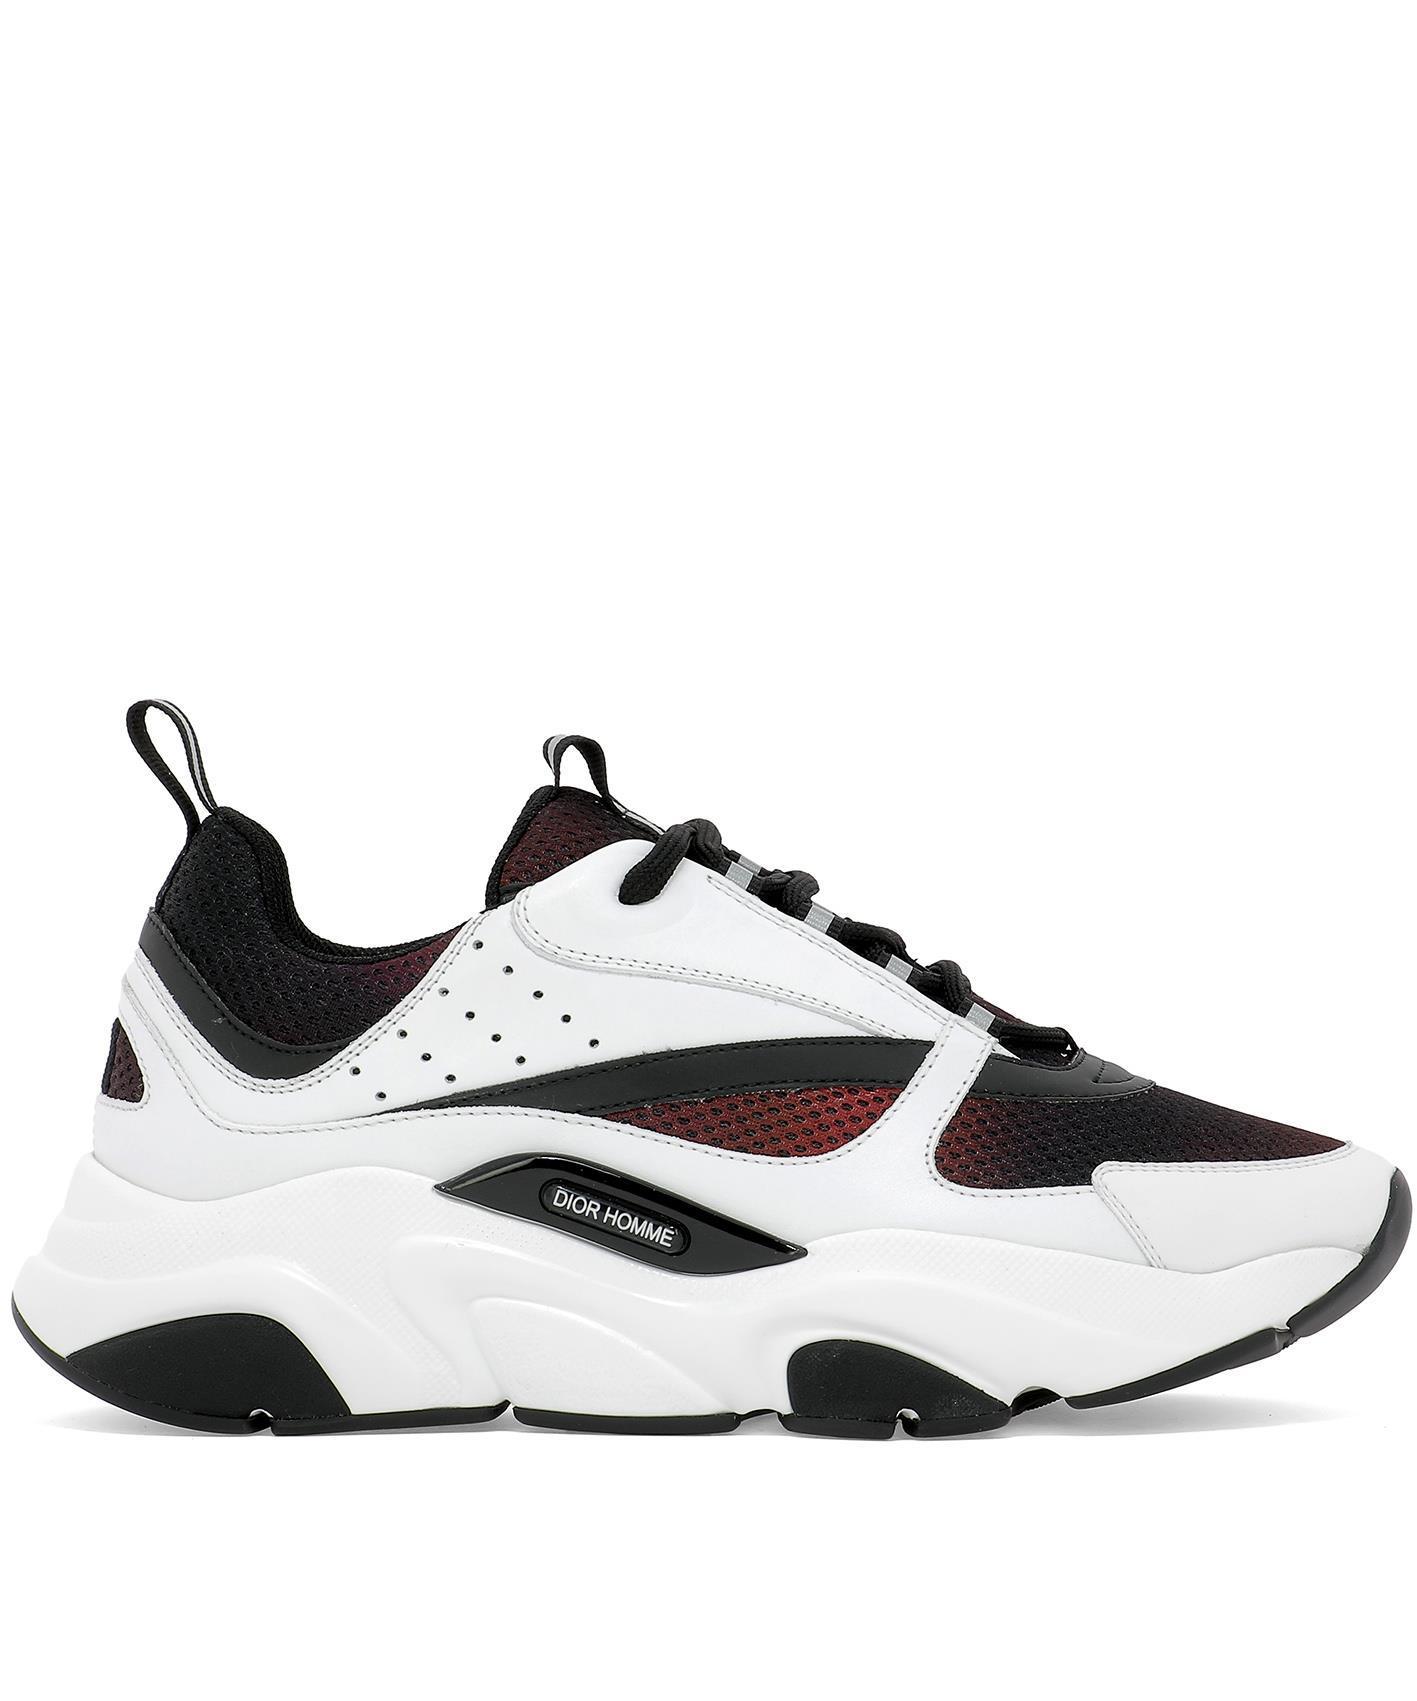 Dior Homme Leather B22 Sneakers in for Men -